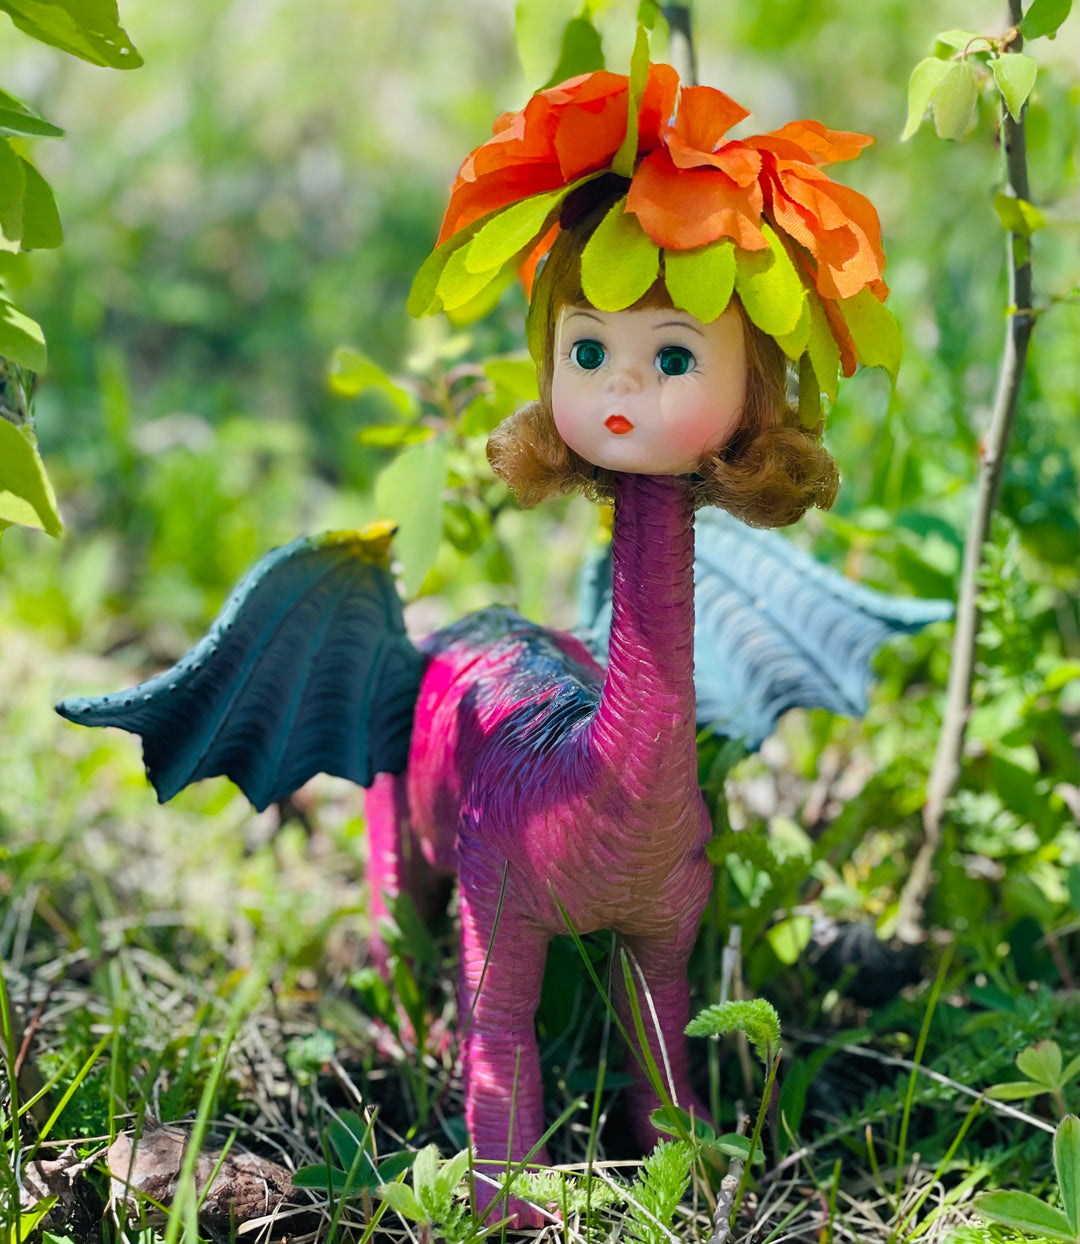 Four legged vintage toy dinosaur with wings and Madame Alexander doll head topped with flower headdress. 9' Tall, 8" long, 7" wide